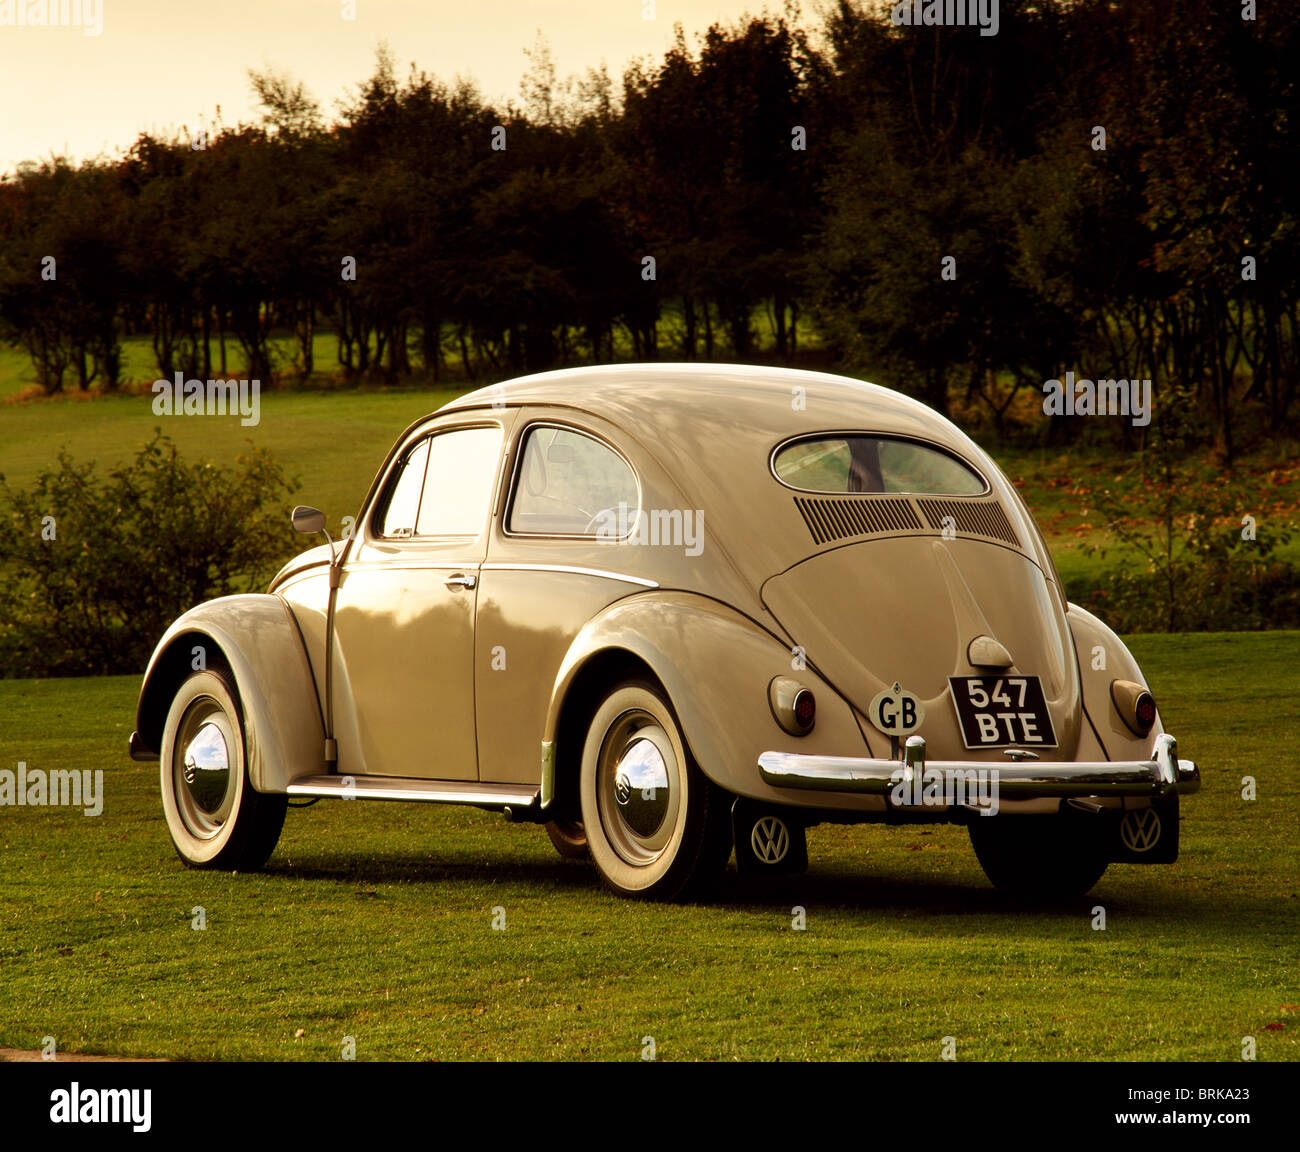 1956 Volkswagen Beetle parked in countryside Stock Photo